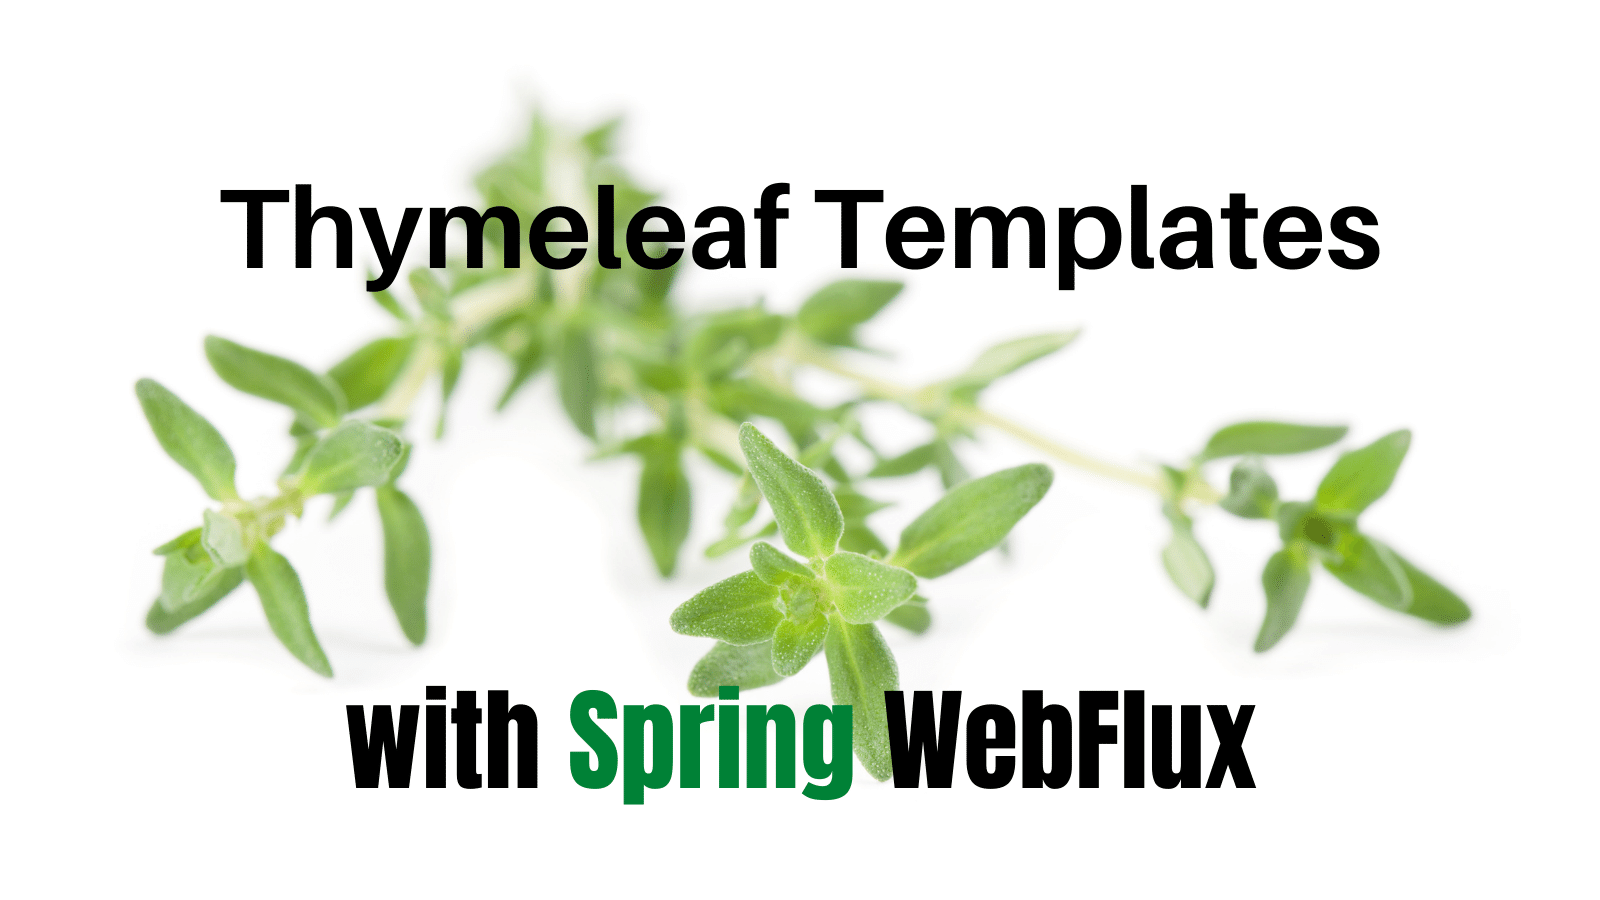 Use Thymeleaf Templates with Spring WebFlux to Secure Your Apps